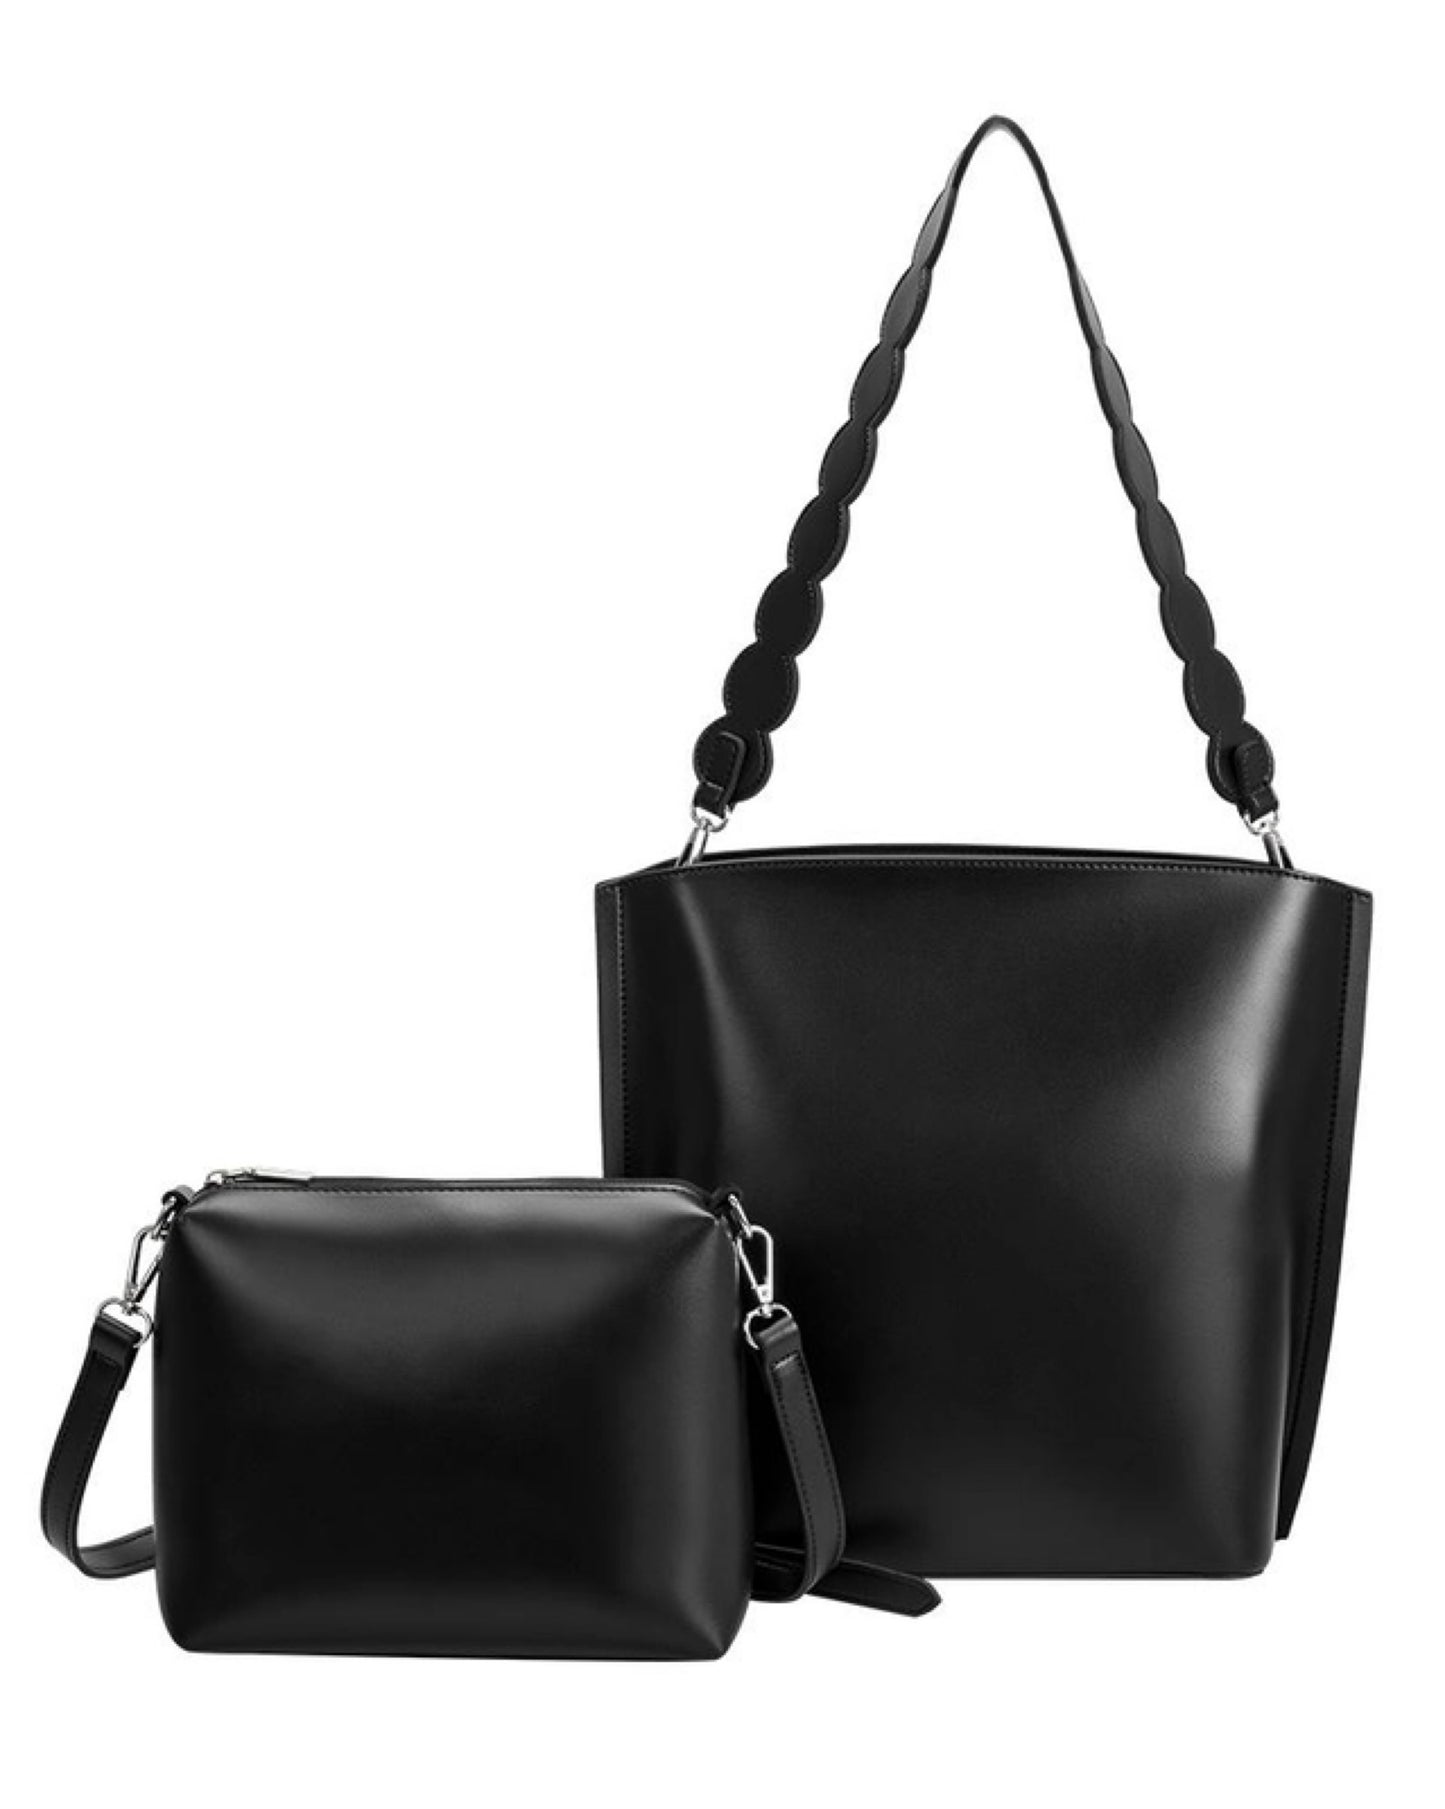 Madison Bucket Tote in Black with Lettuce Cut Strap